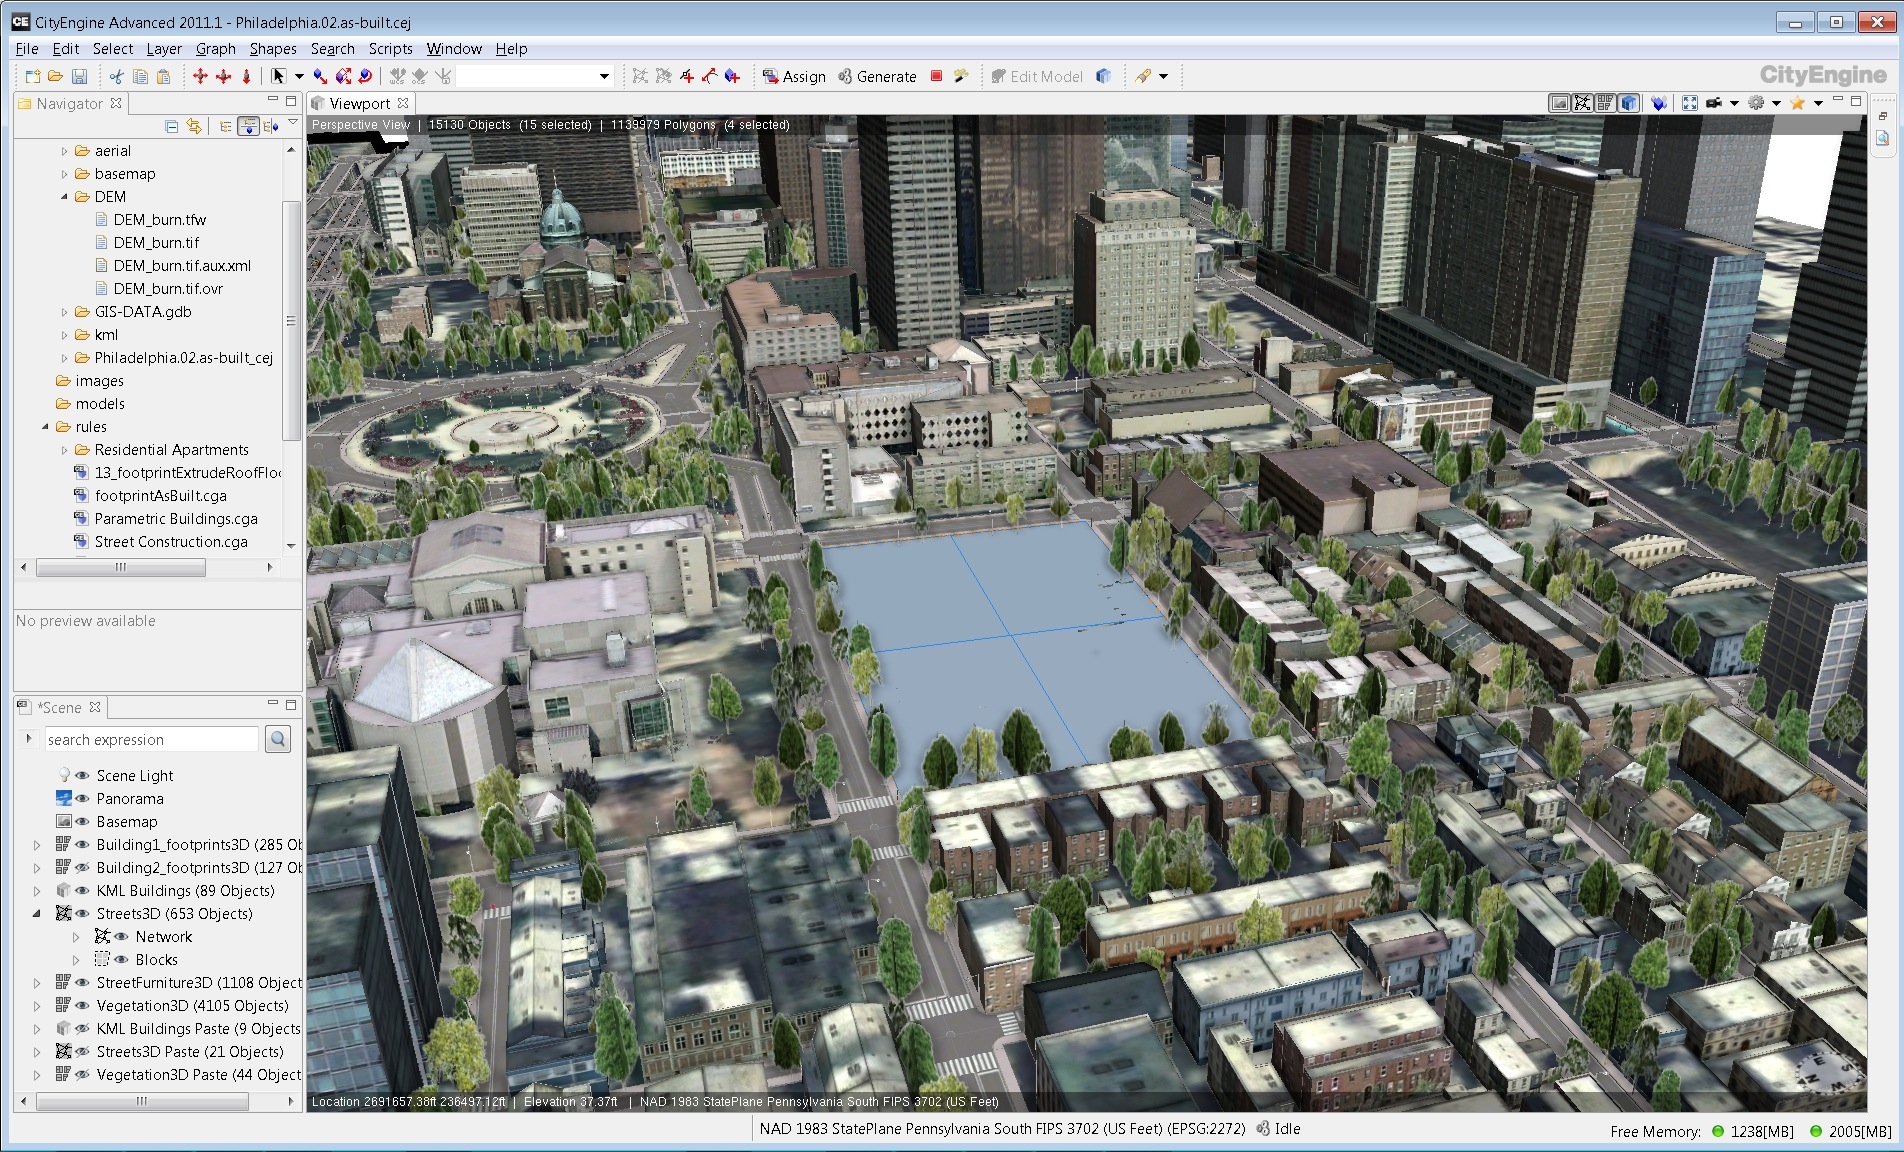 CityEngine Urban Planning Example now available for download